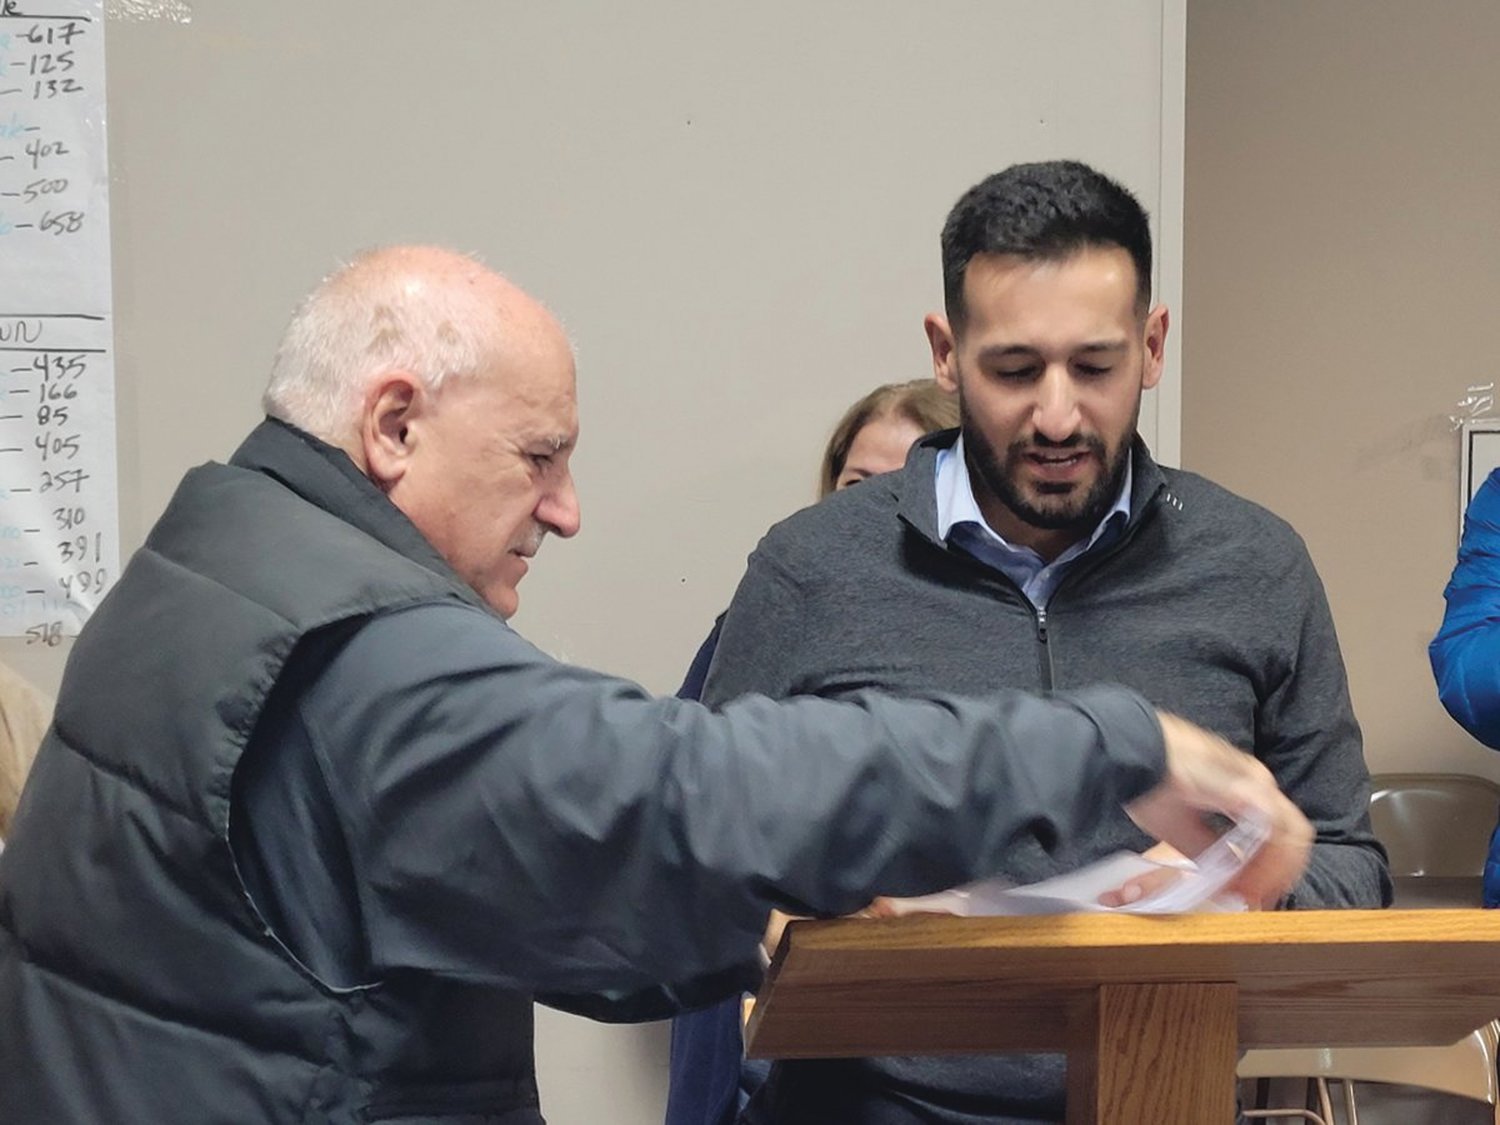 MAYORAL LEGACY: In tears, now outgoing Johnston Mayor Joseph Polisena passed the lectern to his son, Mayor-elect Joe Polisena Jr. after General Election night’s victory was clear.